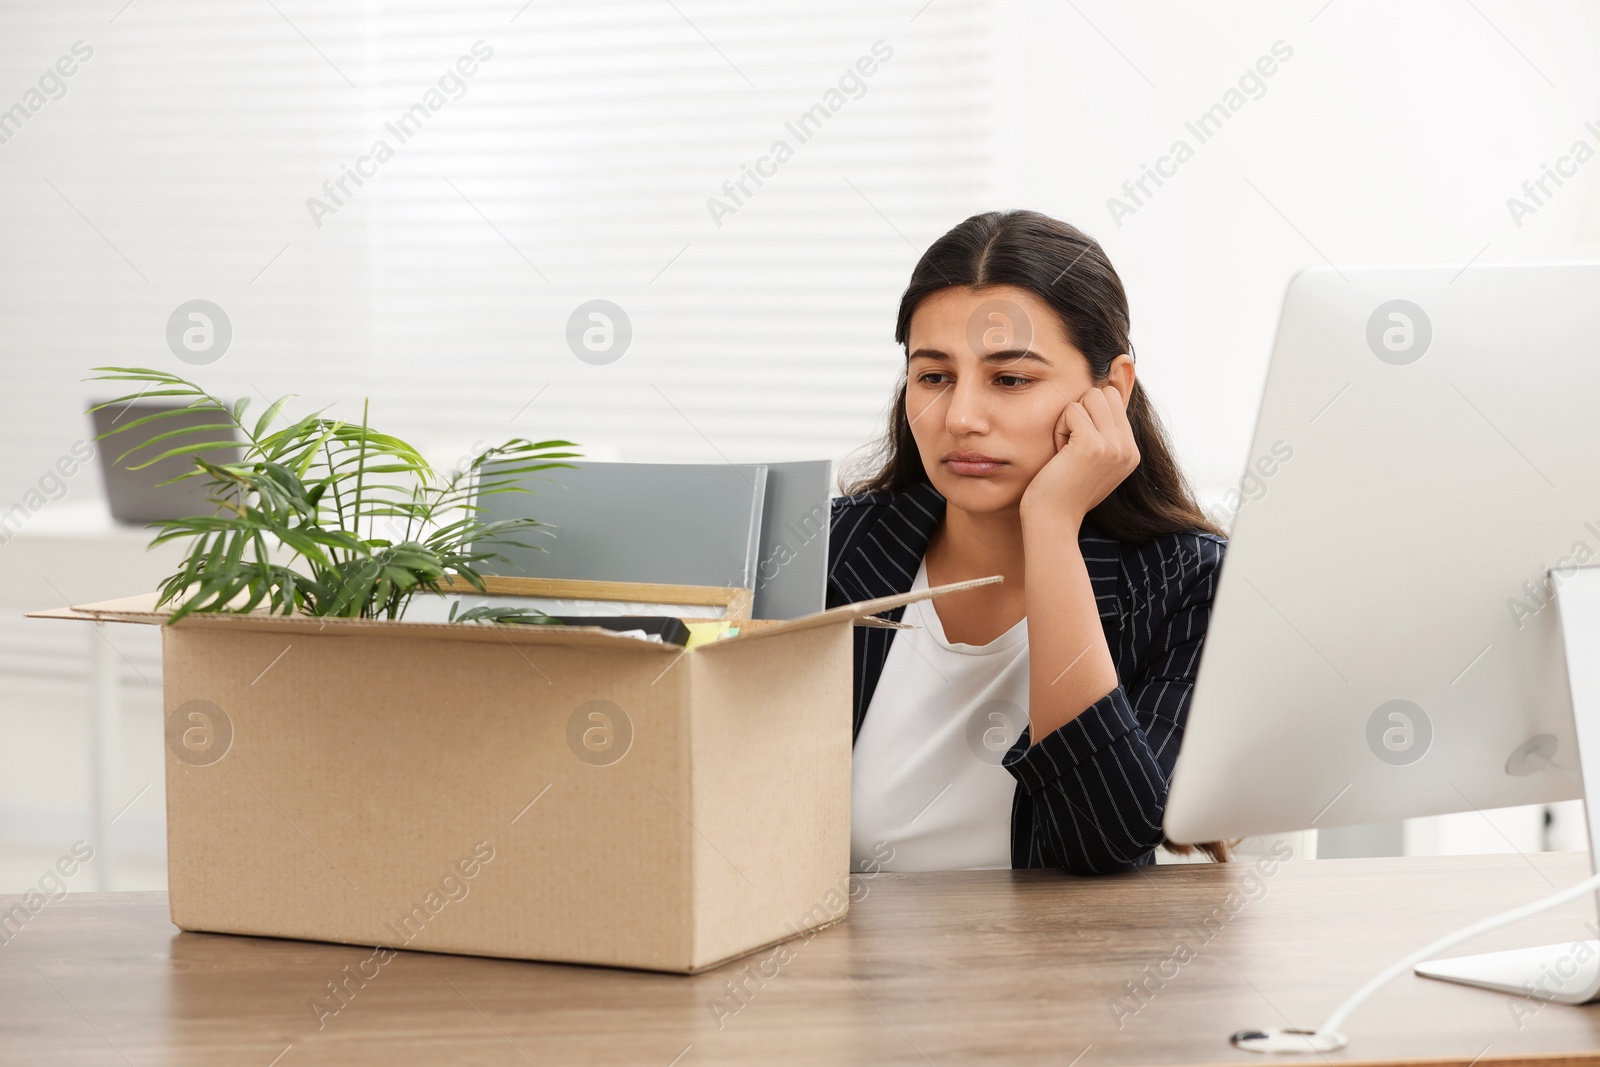 Photo of Unemployment problem. Woman with box of personal belongings at table in office